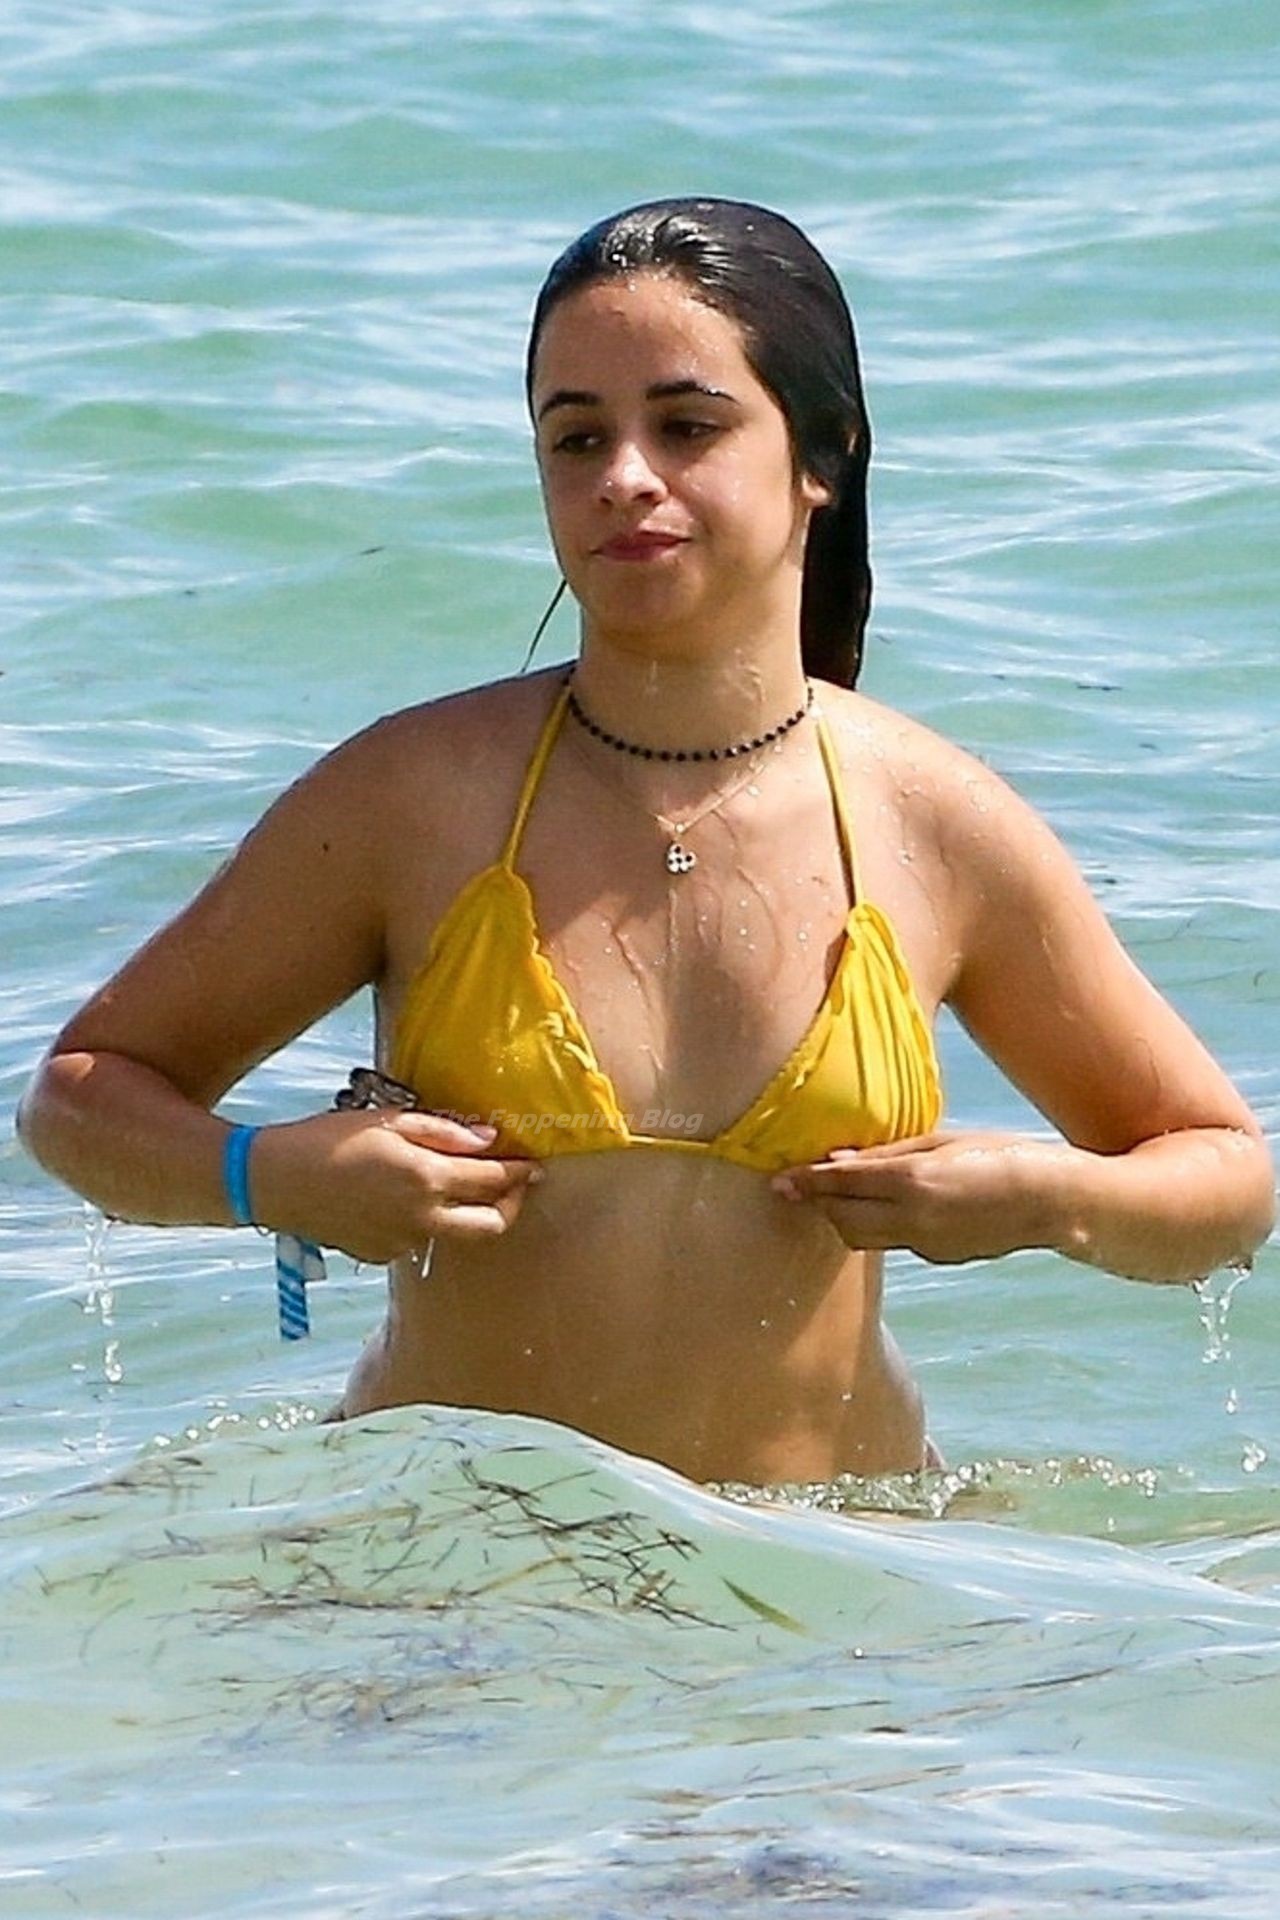 Camila Cabello Isn’t Afraid to Show Off Her Killer Curves in Miami (67 Photos) [Updated]